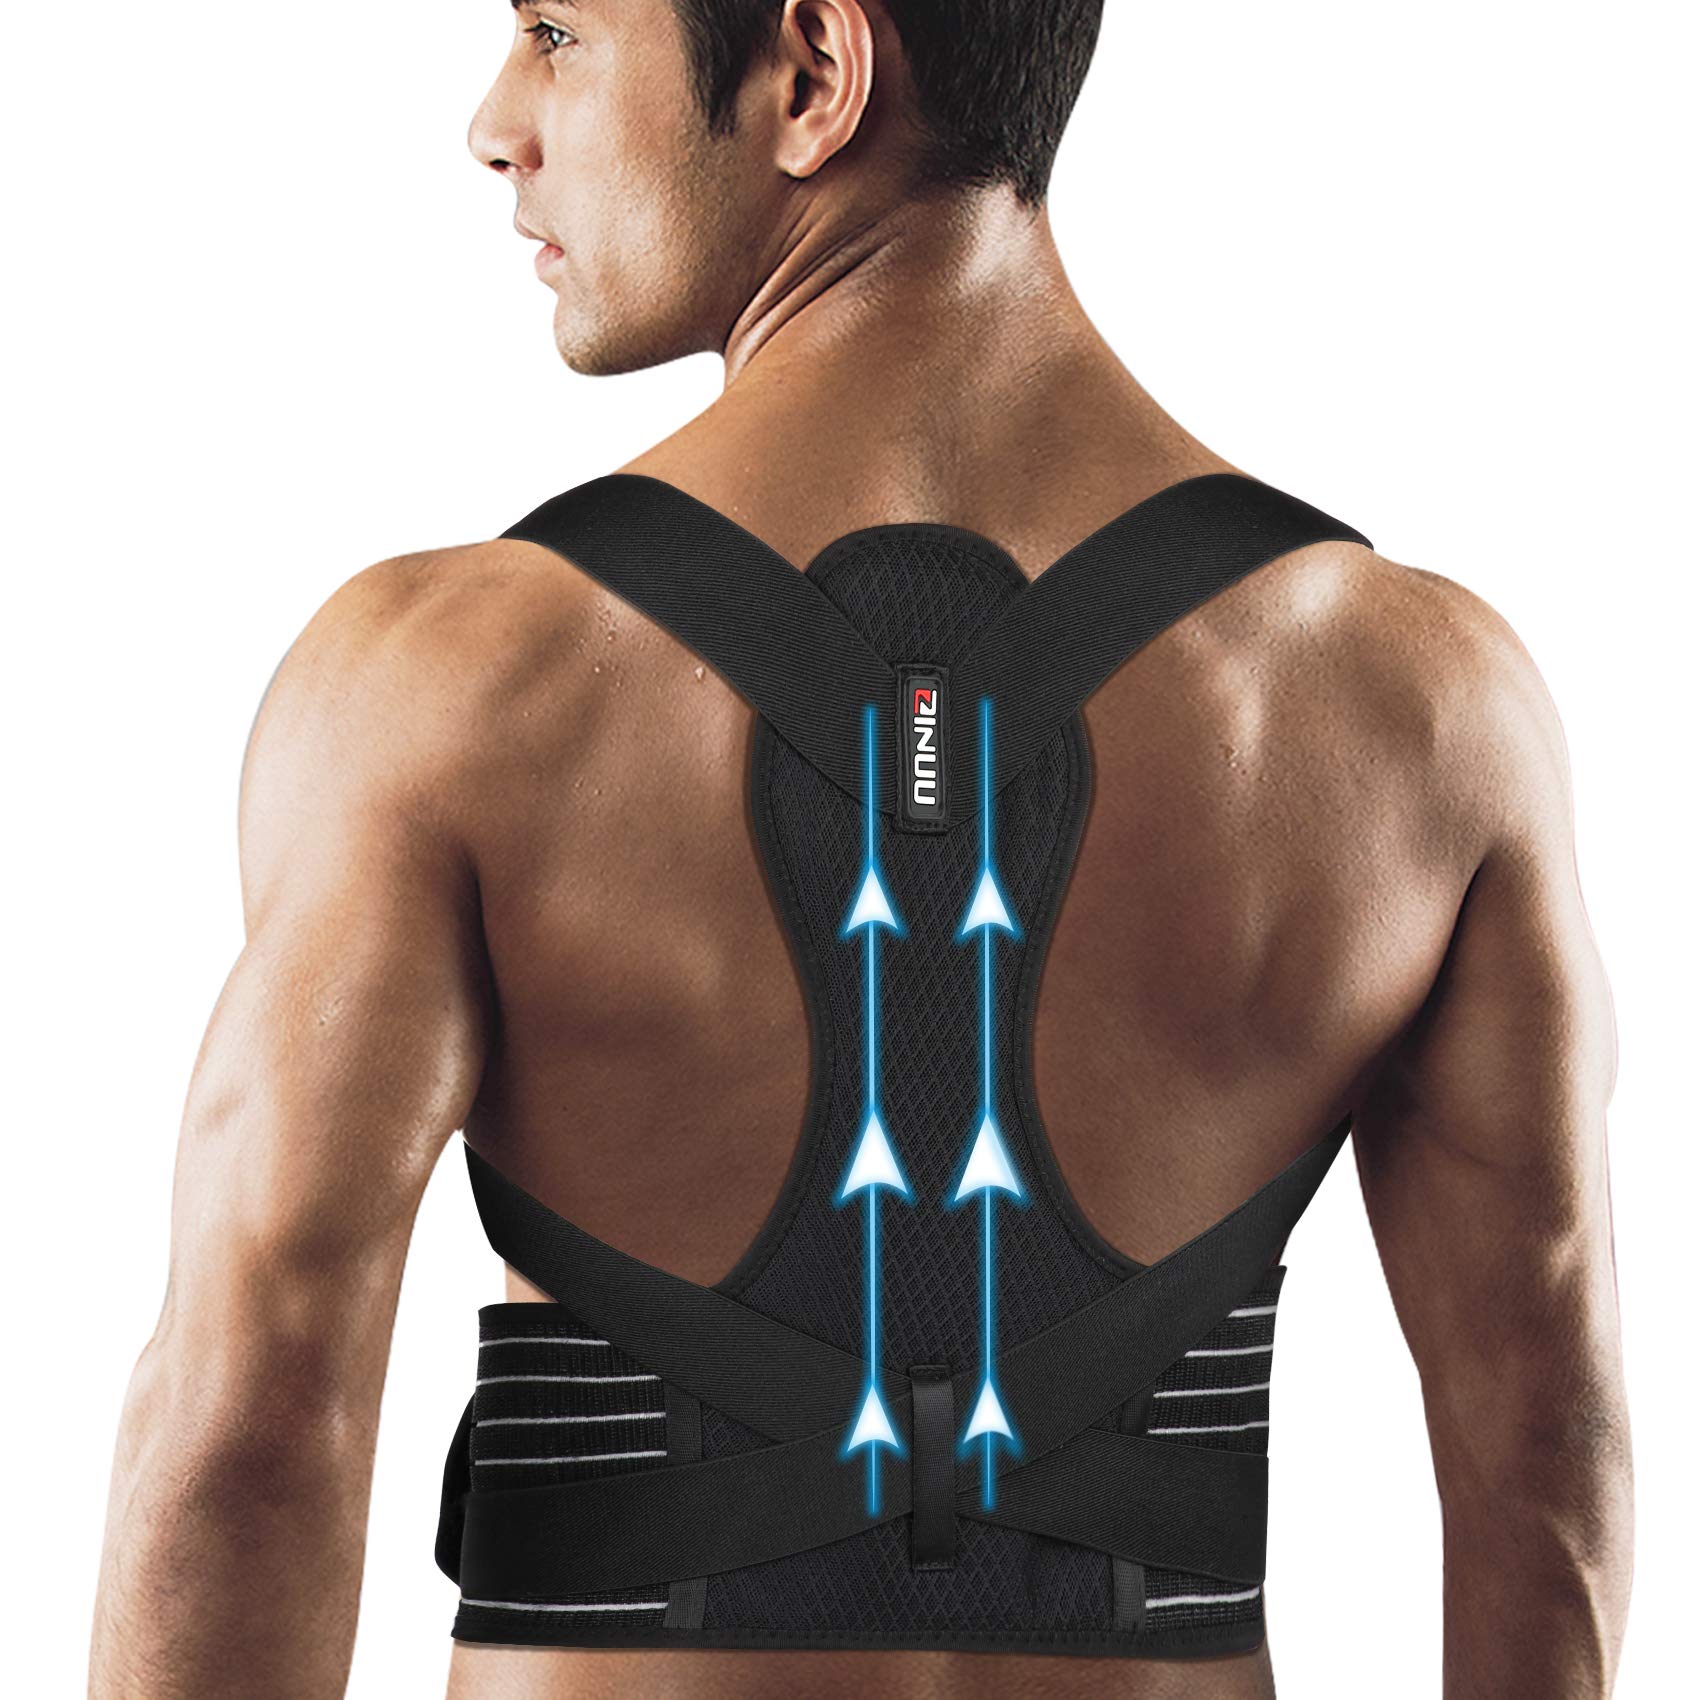 ZINUU Posture Corrector for Men and Women Back Support Belt with